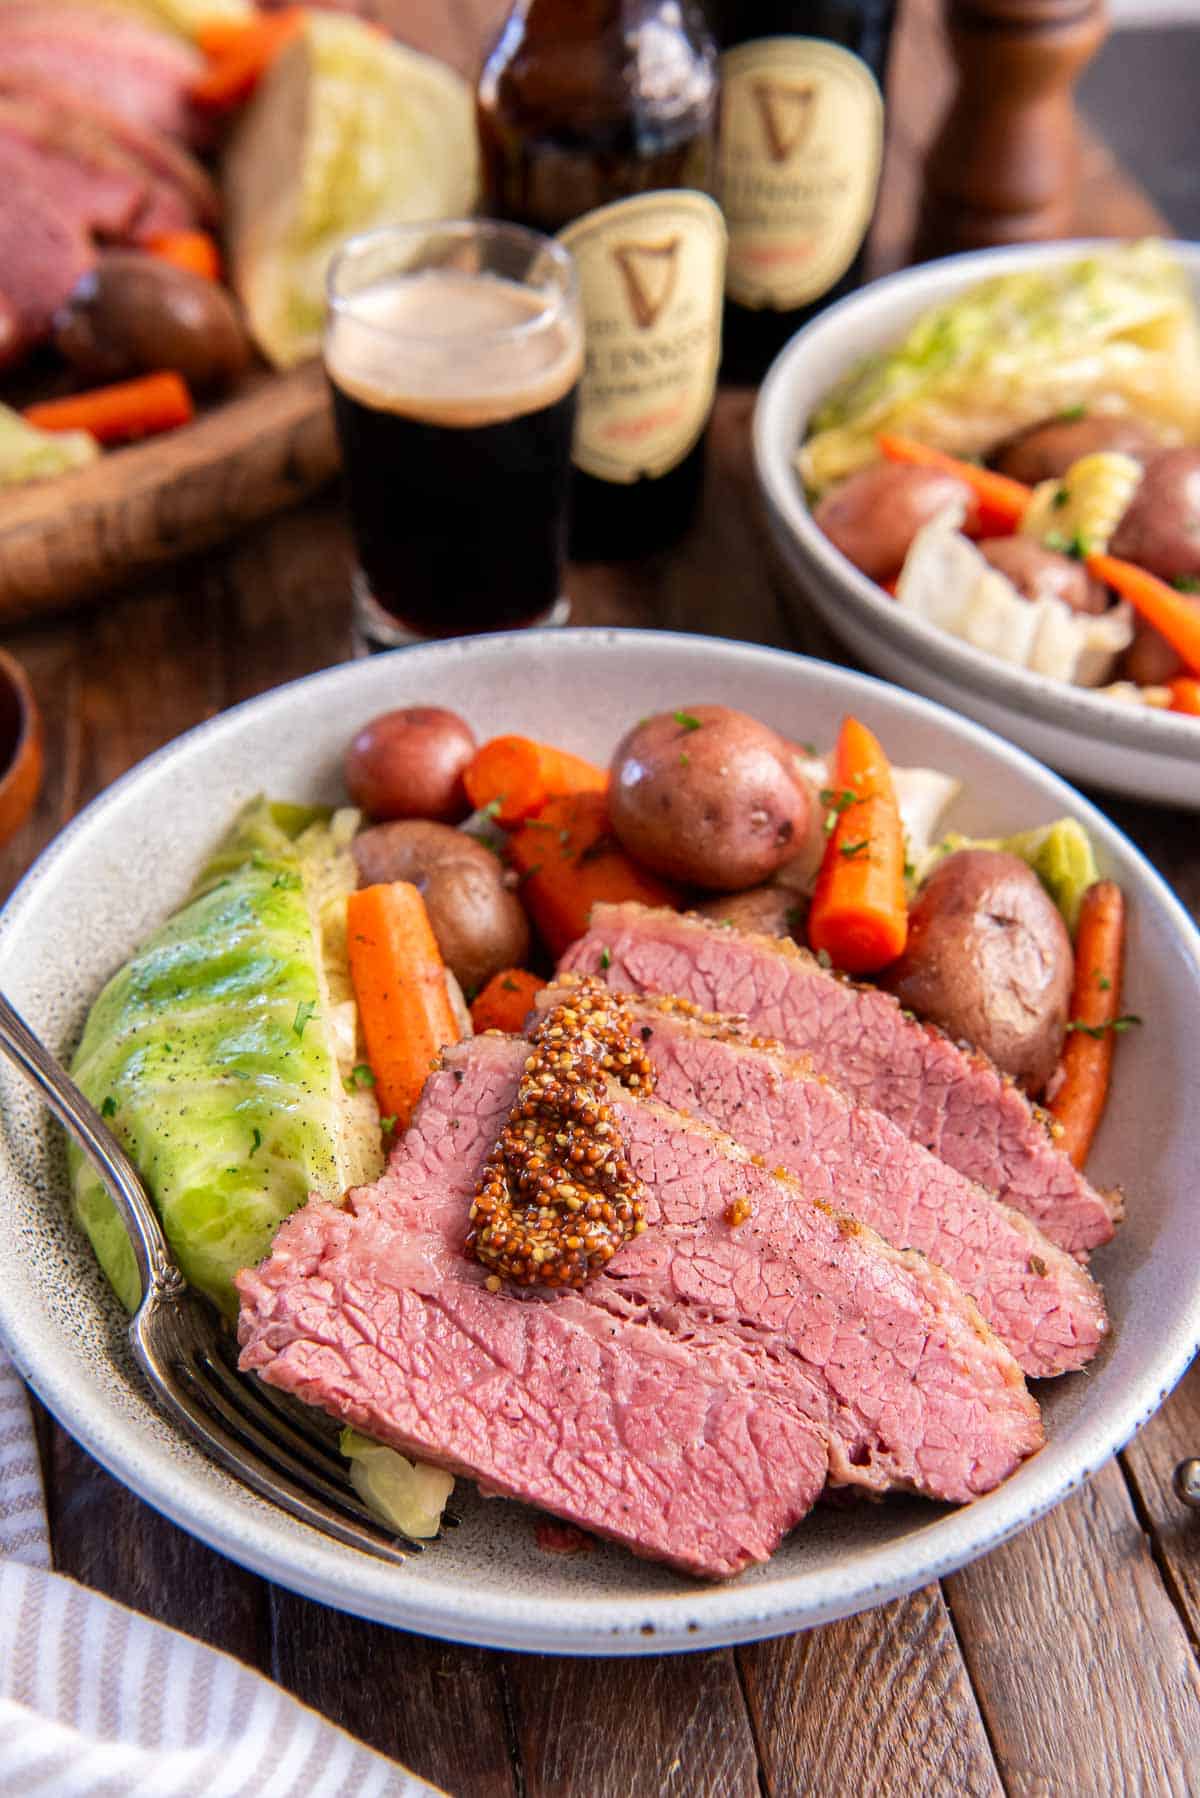 Slices of corned beef topped with a little stone ground mustard in a bowl in cabbage, carrots, and potatoes.